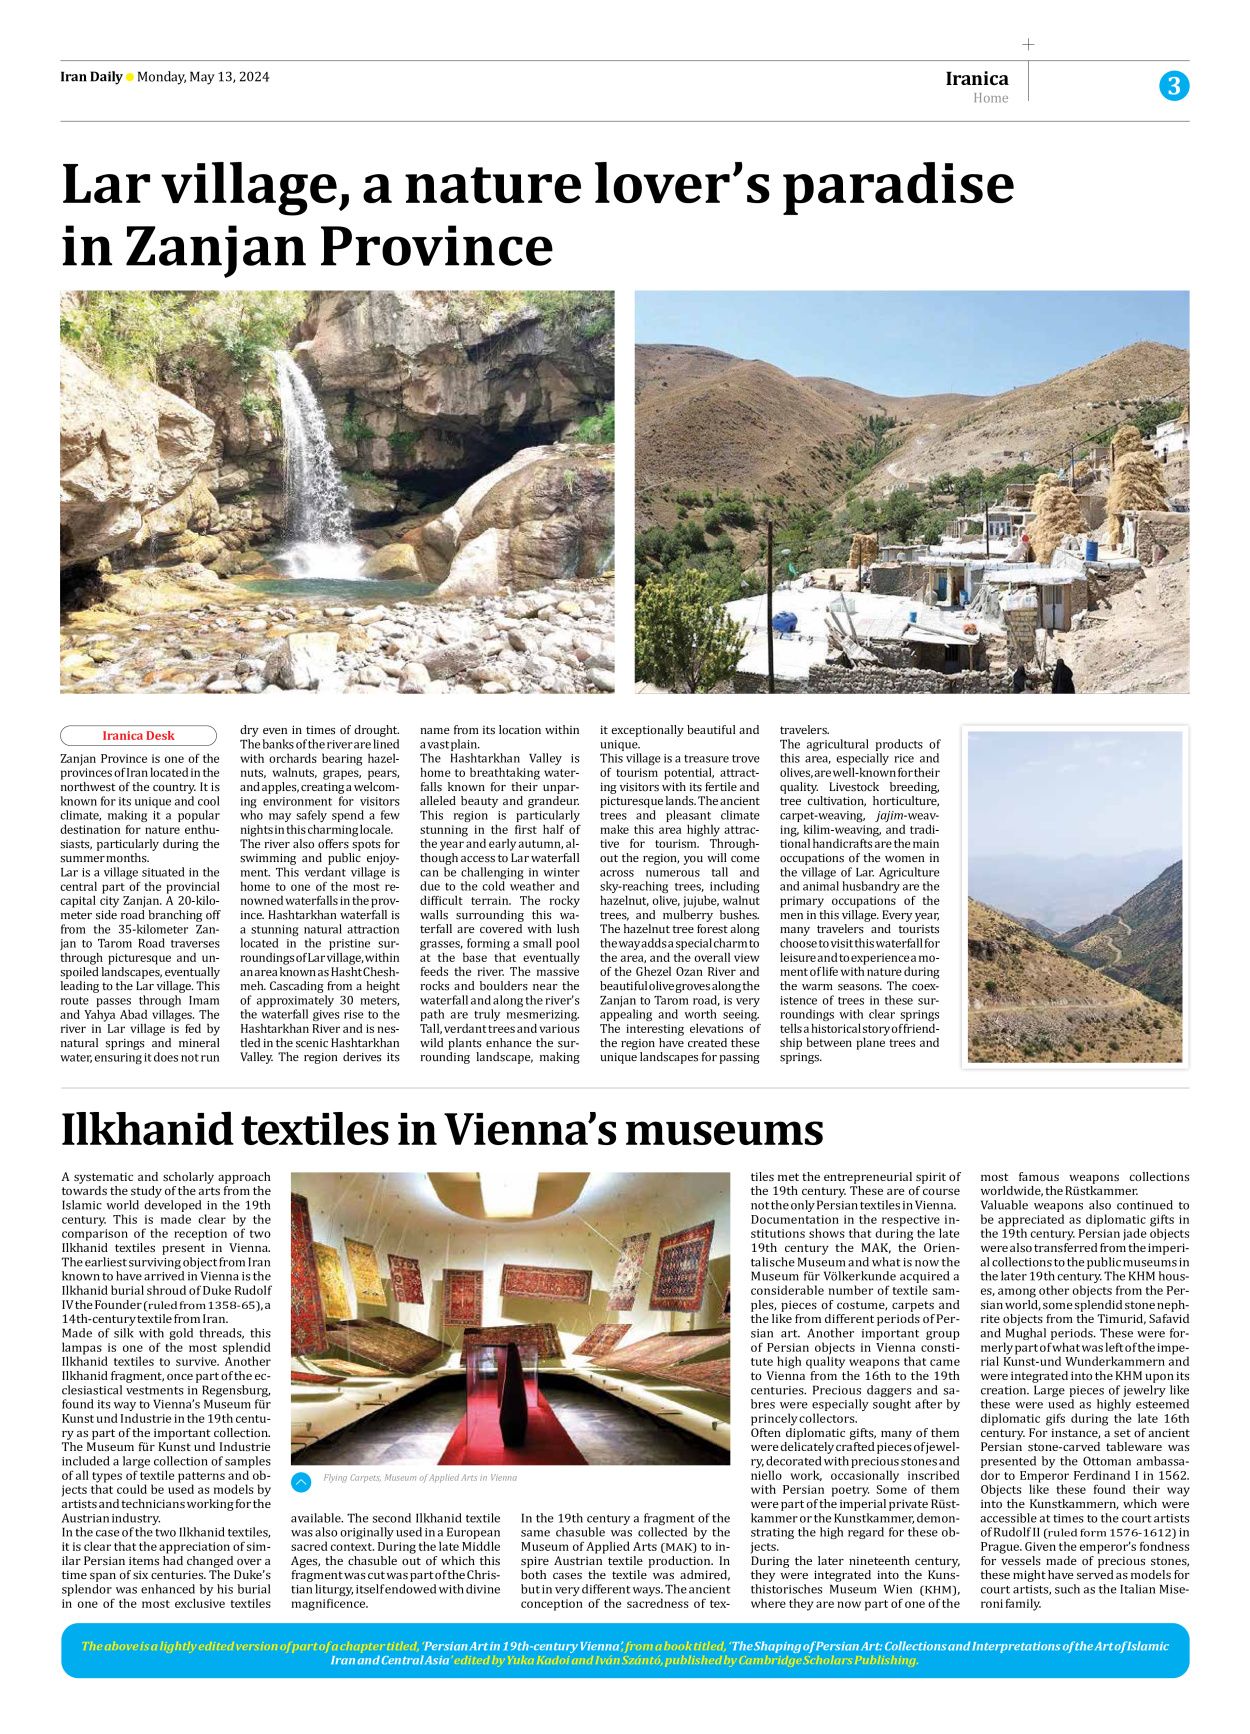 Iran Daily - Number Seven Thousand Five Hundred and Fifty Six - 13 May 2024 - Page 3